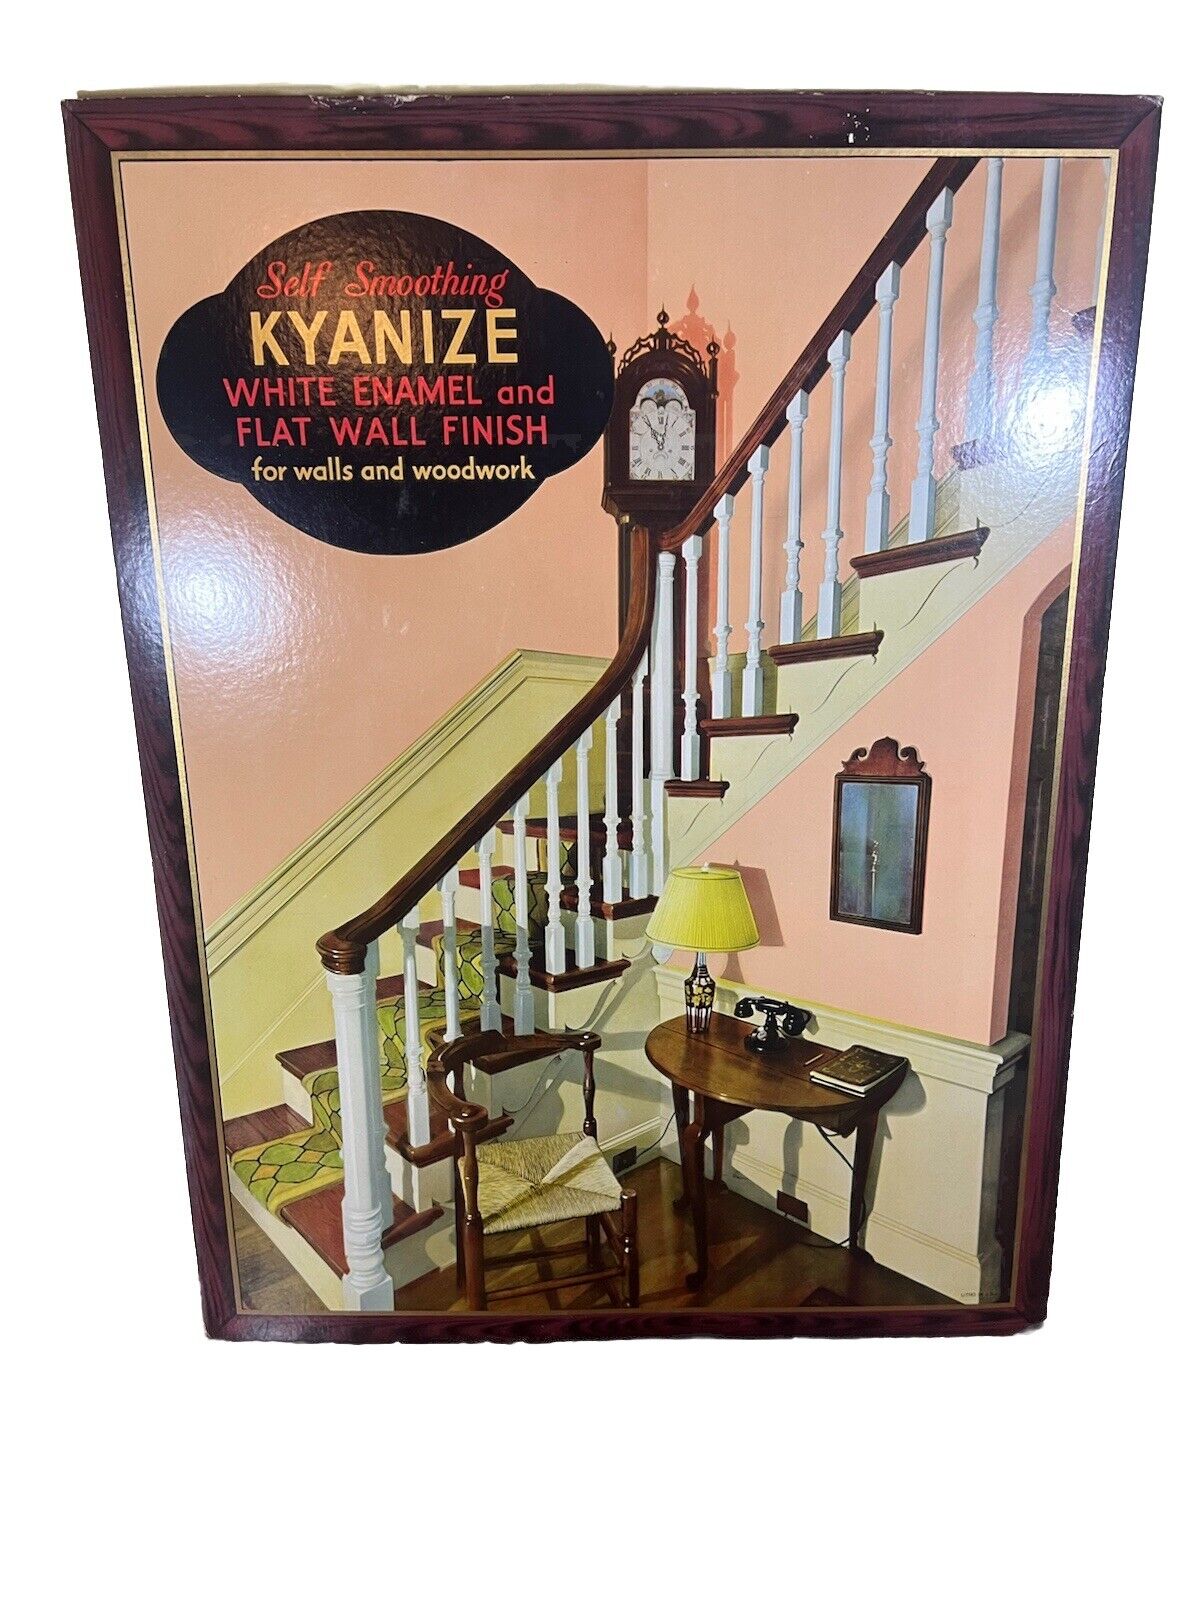 Antique Kyanize Paints Varnishes Store Counter Display Advertising Sign #1